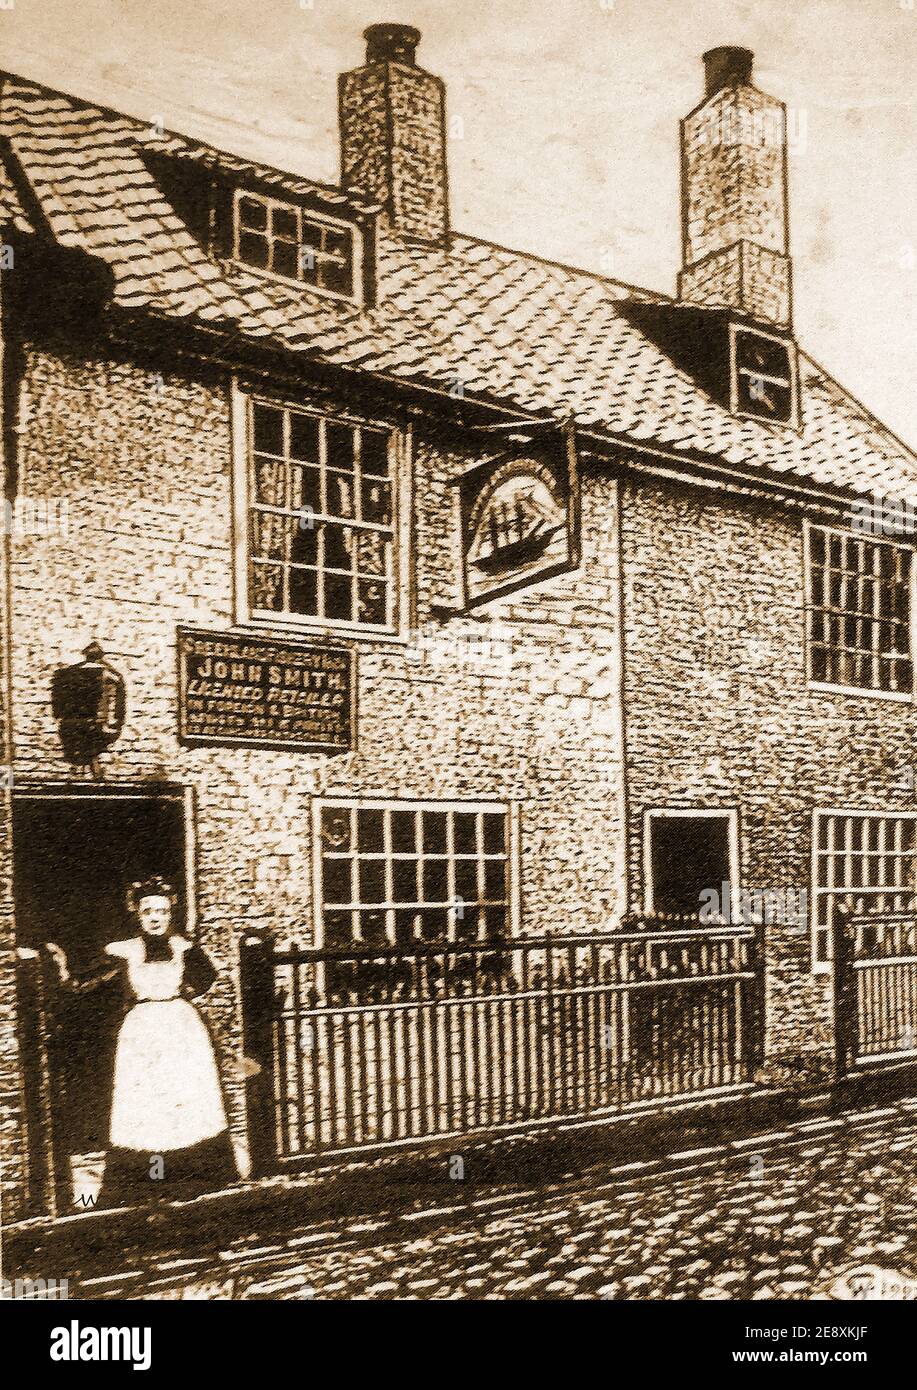 The former 'Greenland Fishery' public house in lower Church Street,  Whitby, Yorkshire, UK, with its landlady standing at the entrance -  Still in existence as a private dwelling today. Stock Photo